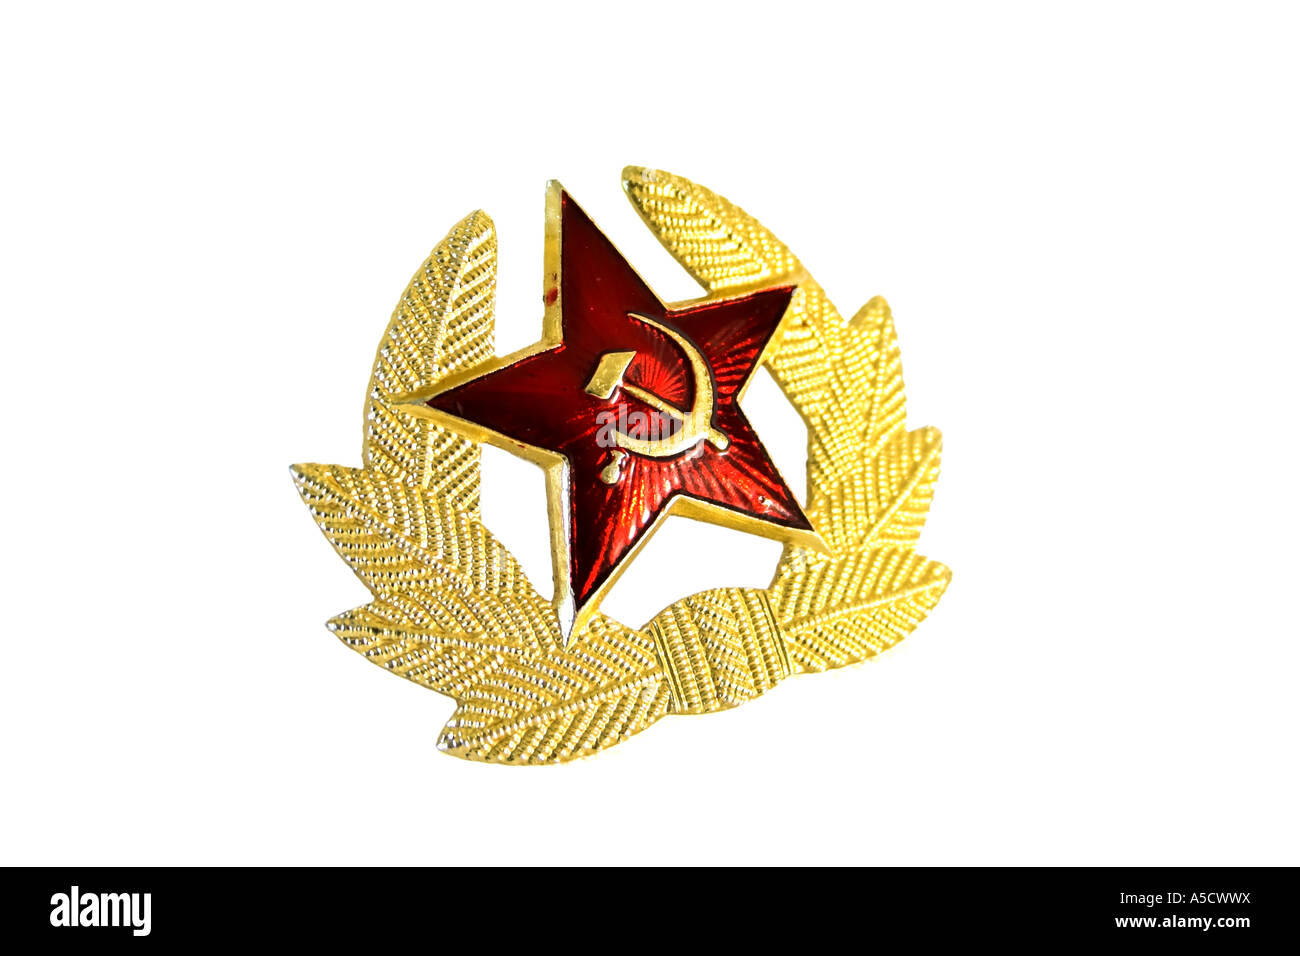 Military badge from the former Soviet Union. Stock Photo